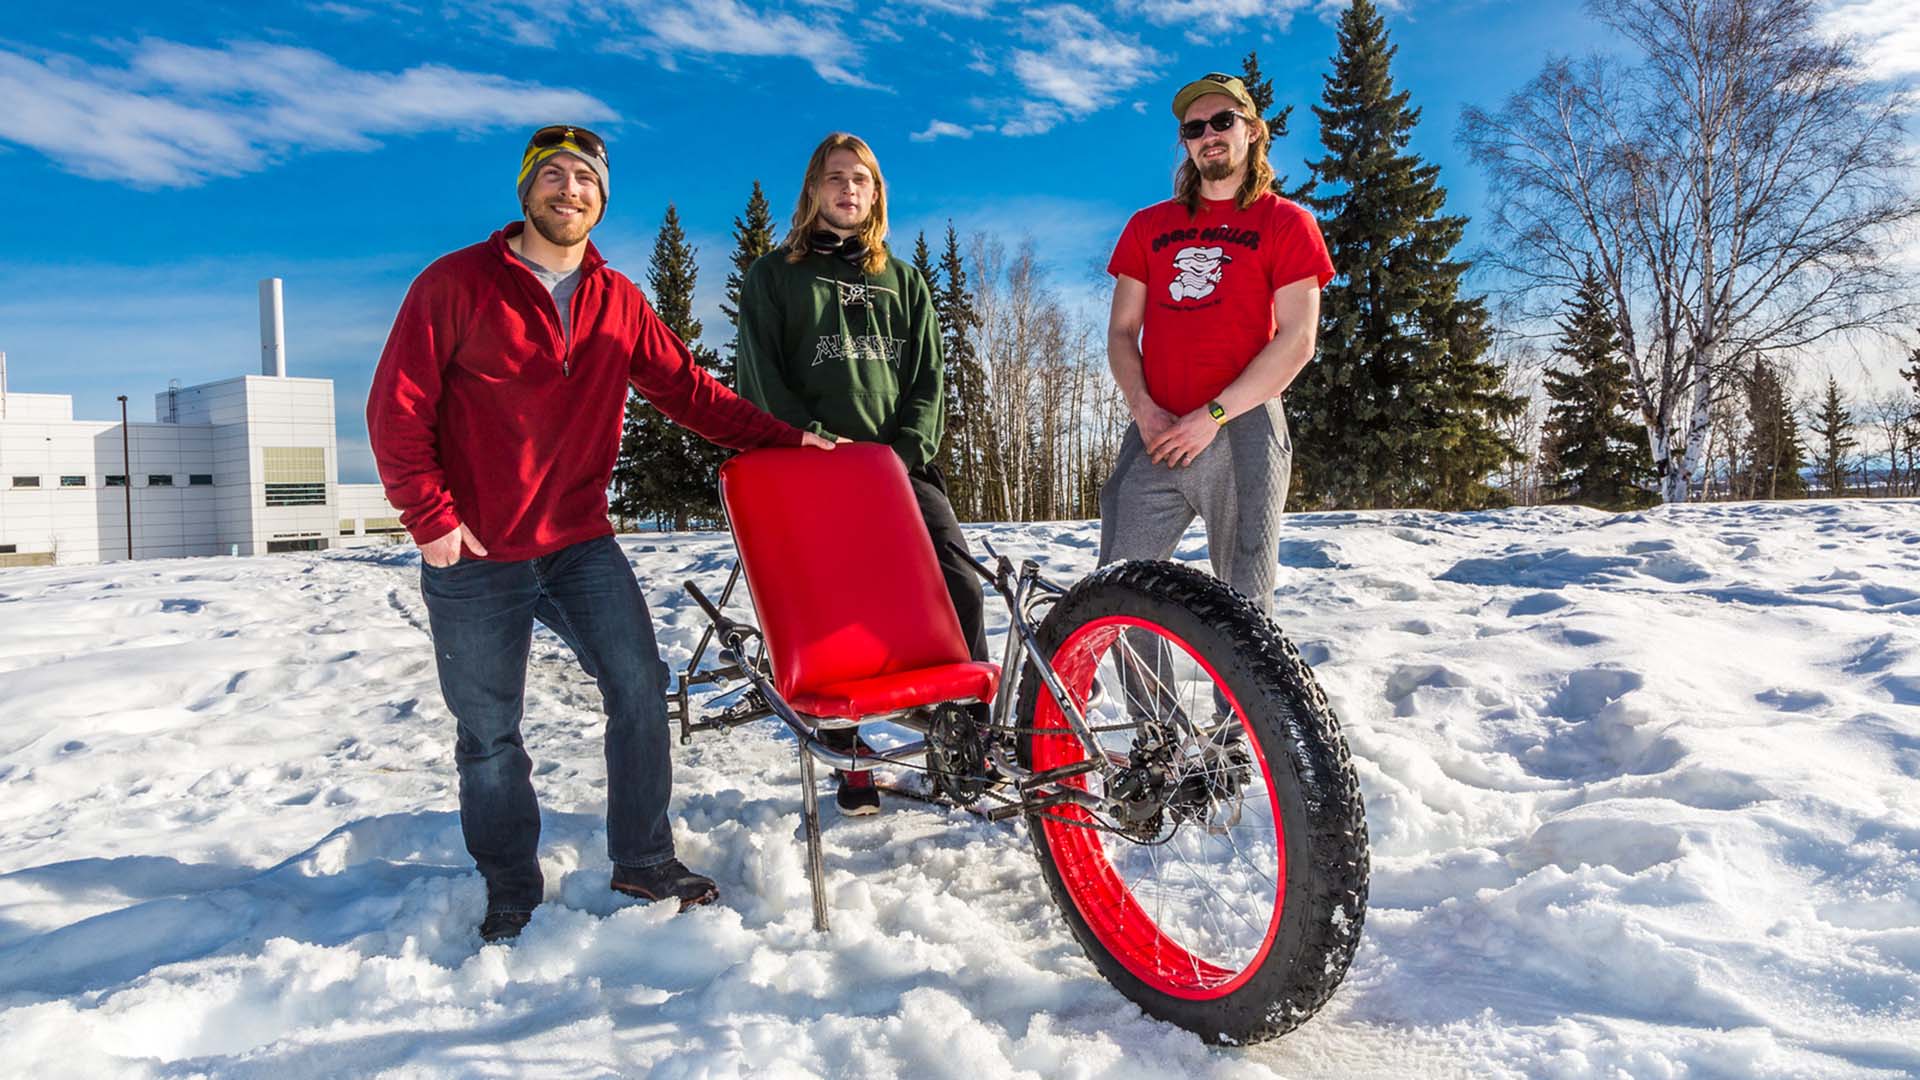 Mechanical engineering majors pose with their fat tire ski bike they designed and built for paraplegic users as their spring 2016 senior design project.